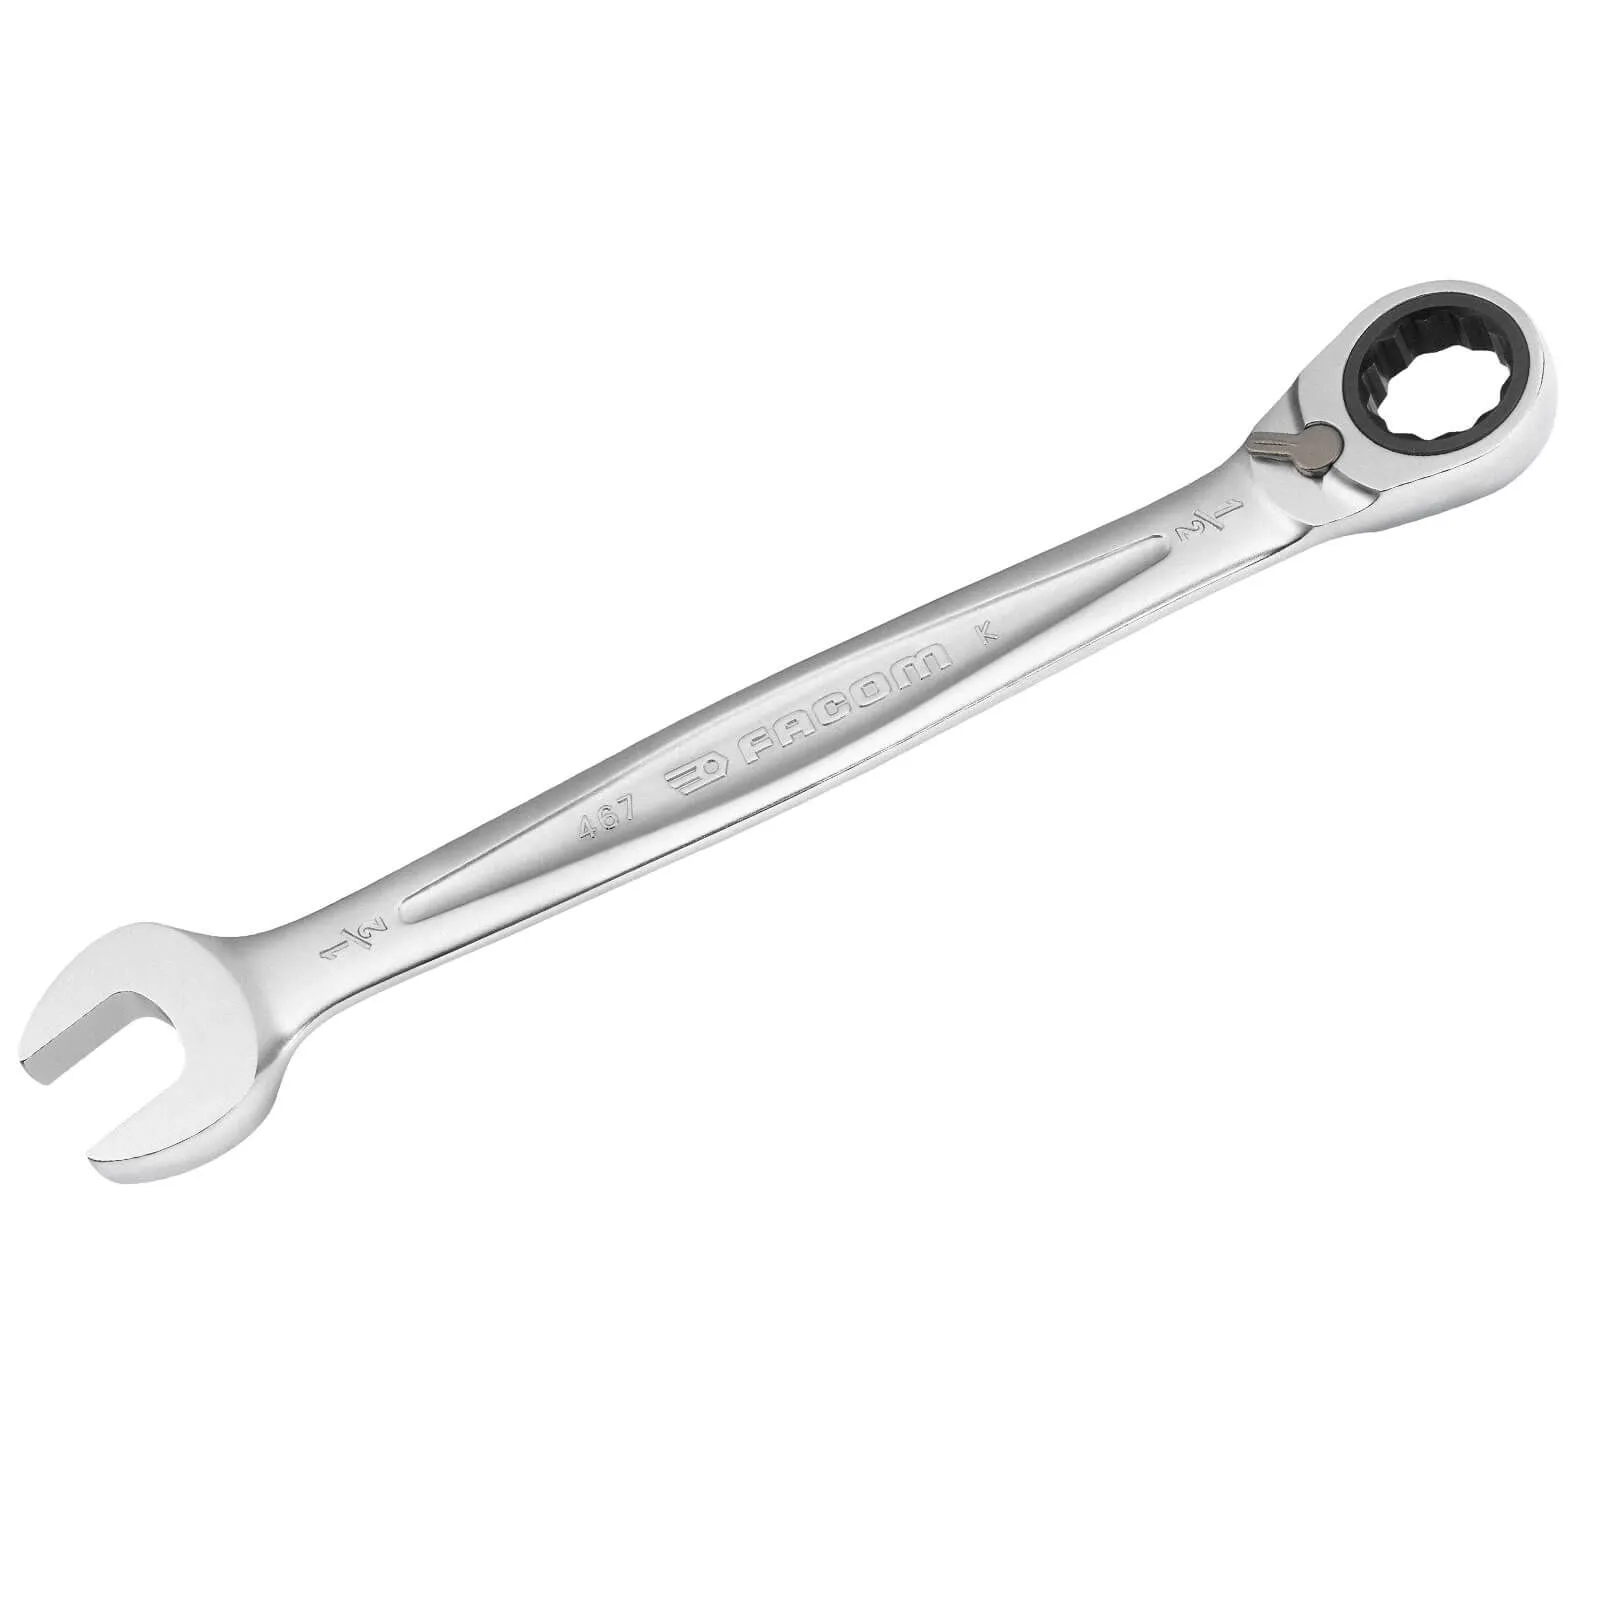 Facom 467 Ratchet Combination Spanner Imperial - 7/16"